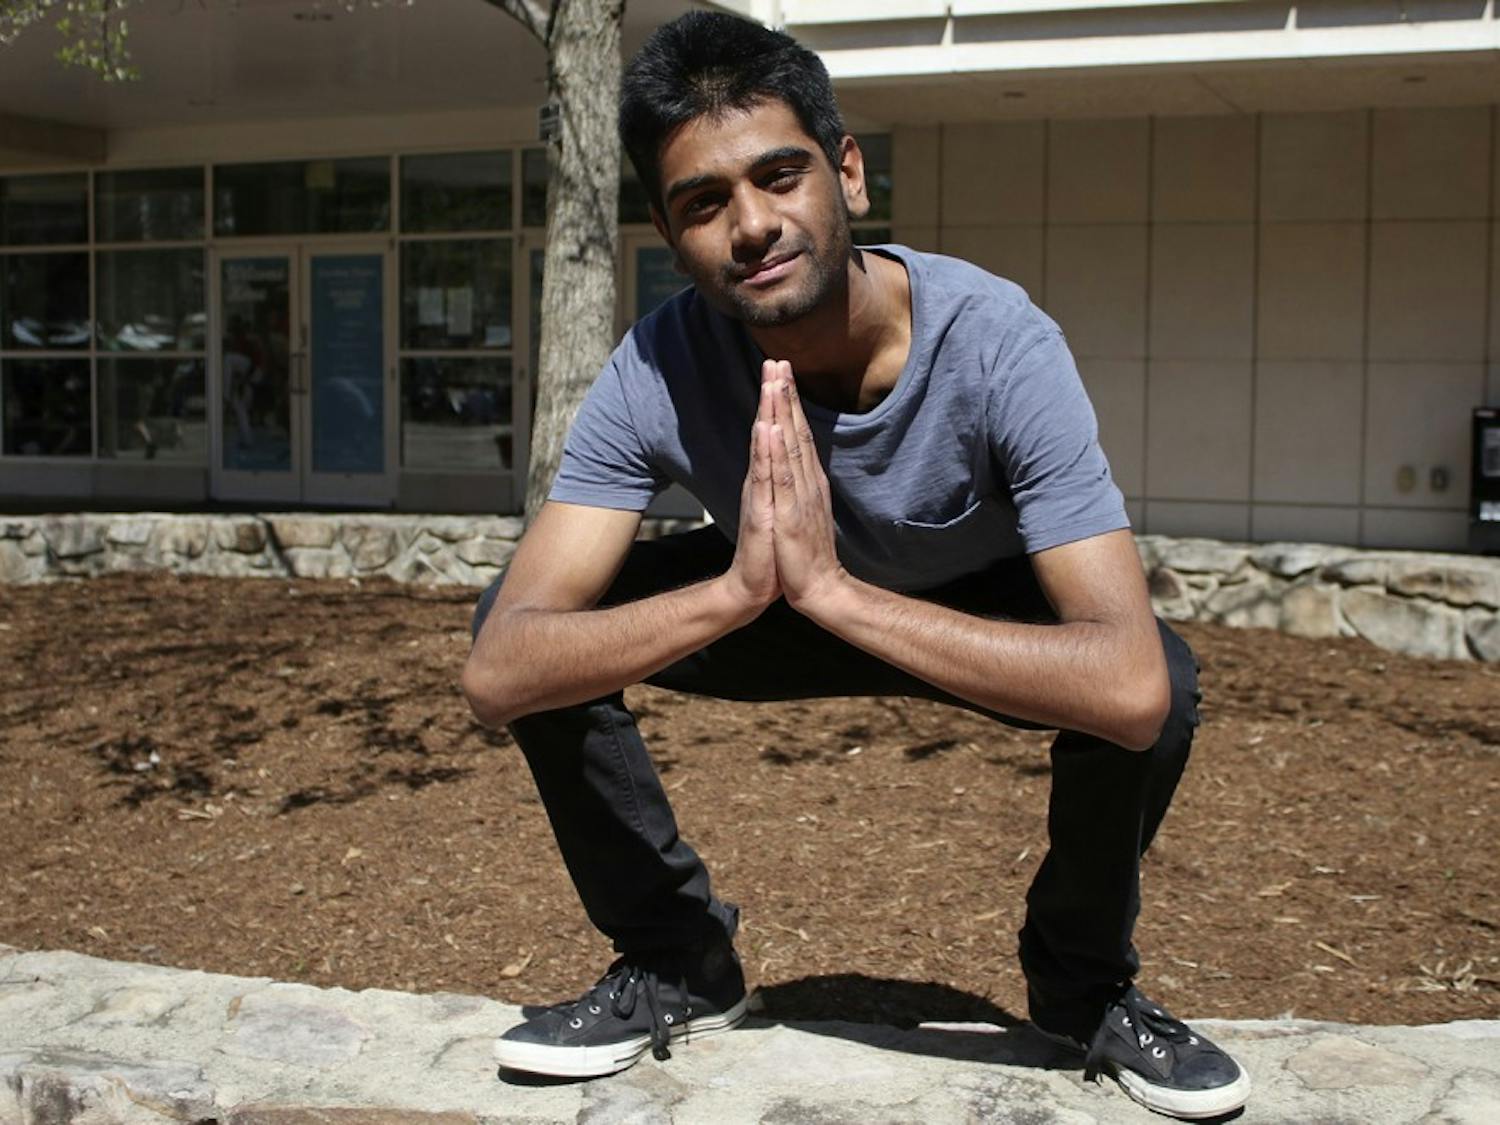 Vivek Menon is a UNC-Chapel Hill student and rapper who will be dropping an album soon.